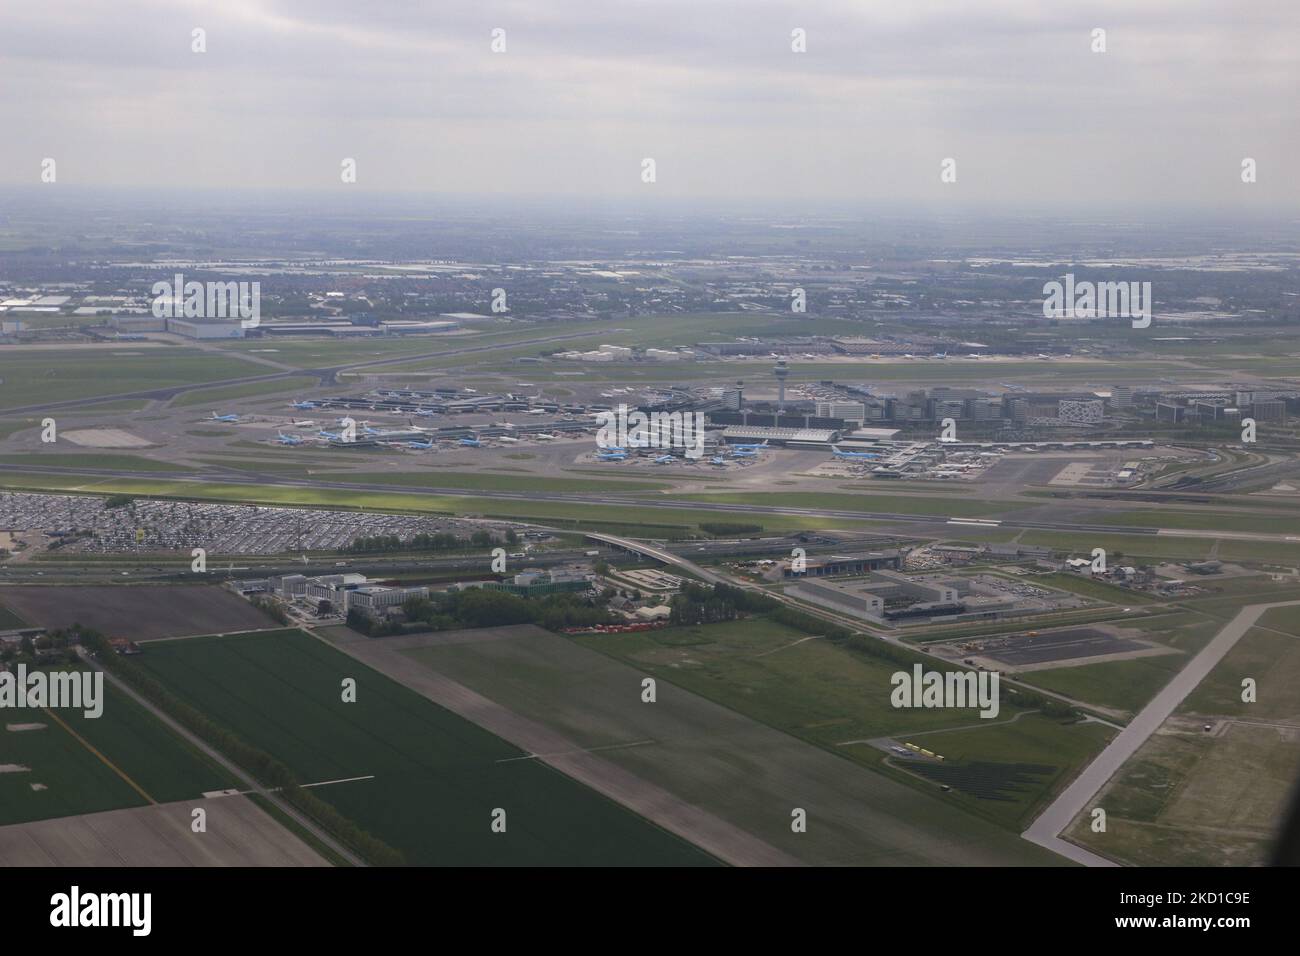 Panoramic aerial view of Amsterdam airport, the terminal, control tower, aircraft, runways, taxiways, parking, dummy testing plane for firefighters and the residential area with houses, roads and canals of the Dutch capital city Amsterdam as seen from an airplane window after takeoff, departing from Polderbaan runway from Amsterdam Schiphol Airport. Amsterdam, the Netherlands on May 4, 2021 (Photo by Nicolas Economou/NurPhoto) Stock Photo